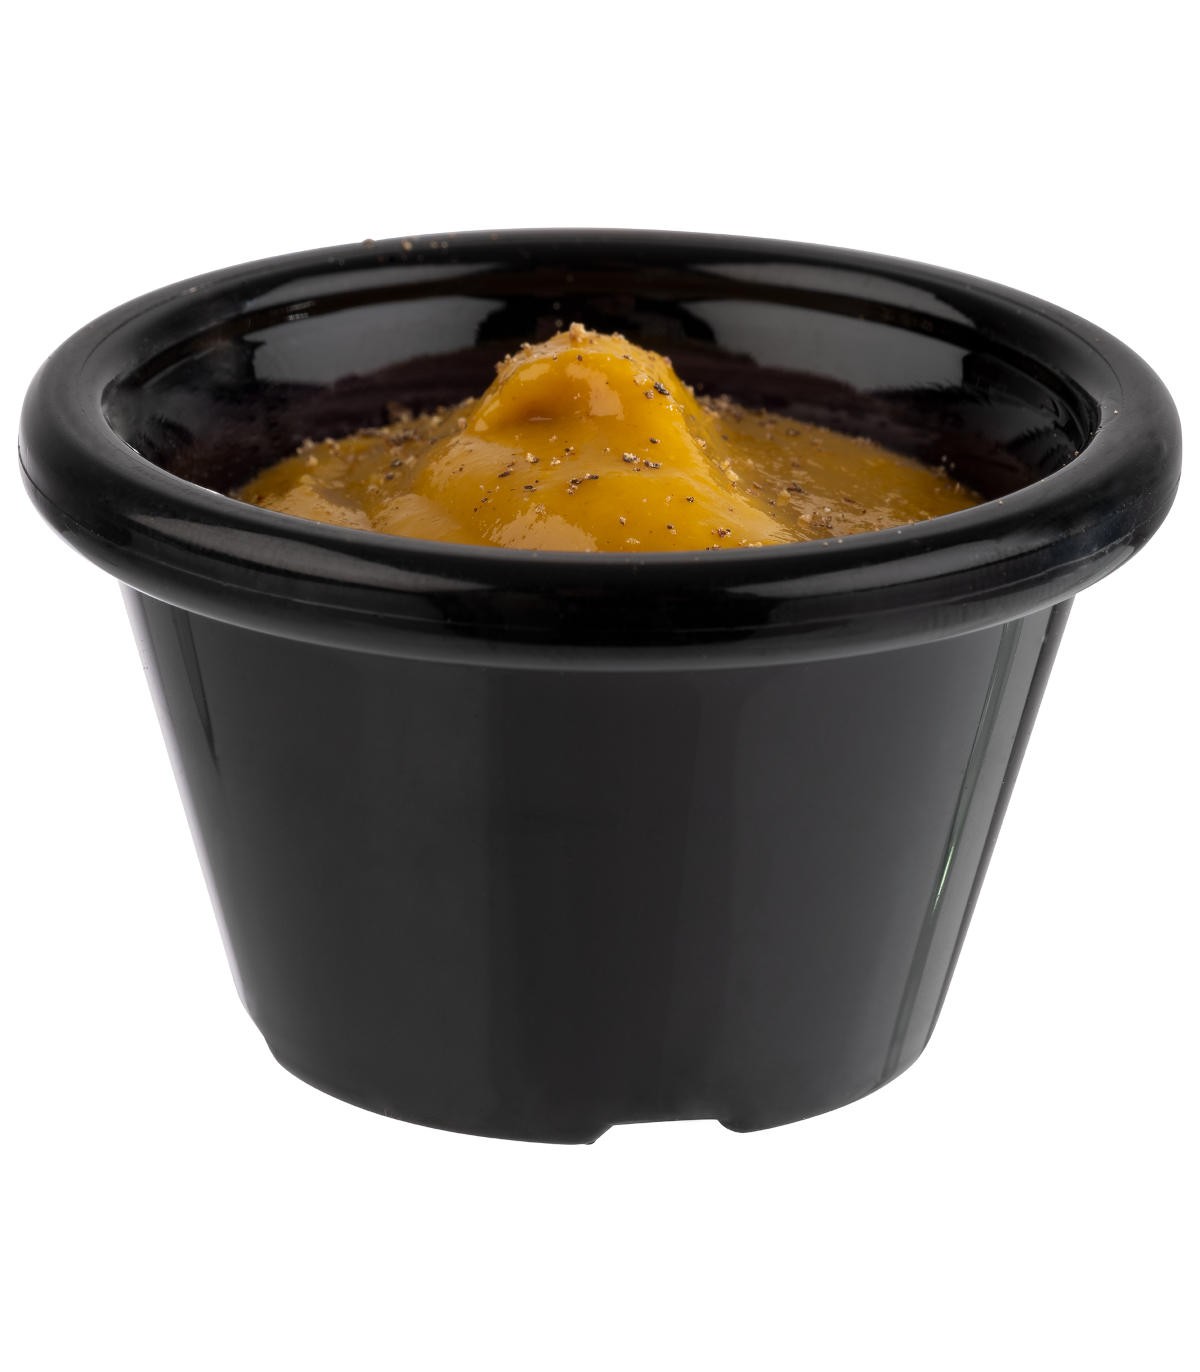 Dip Containers